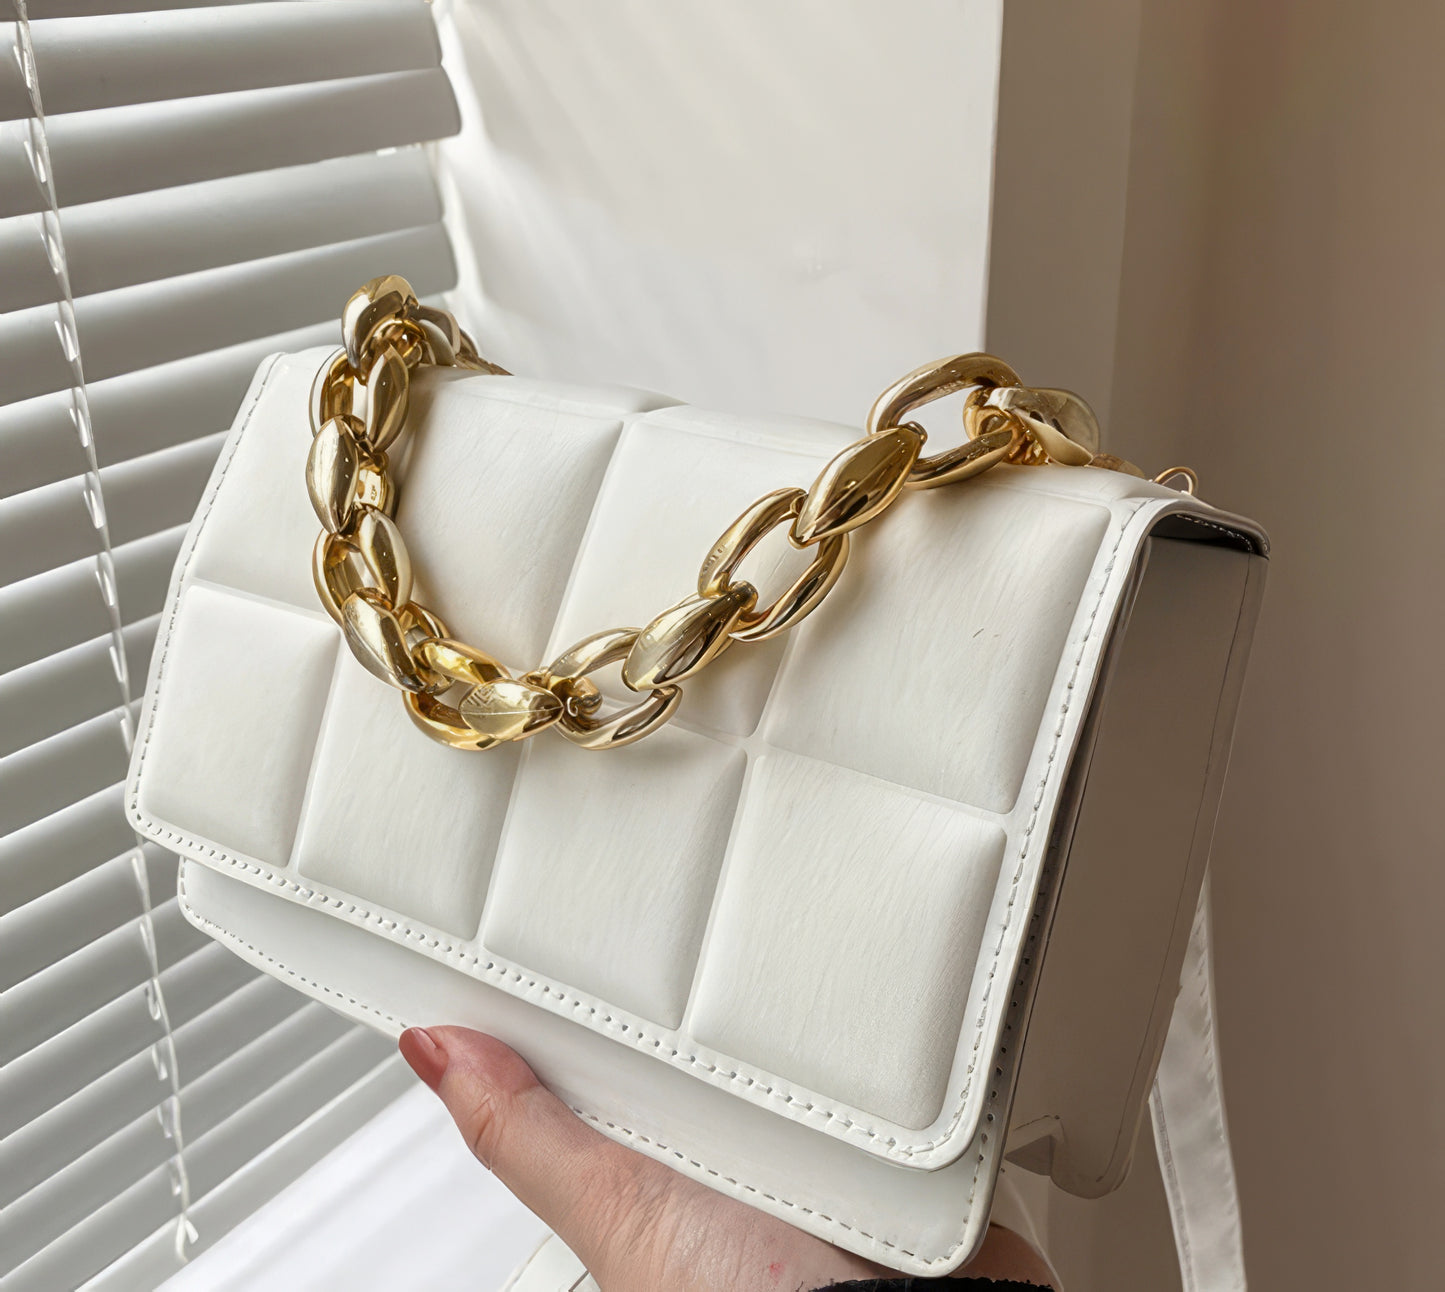 Exquisite Pleated Padded Shoulder Cross-Body Flip Snap Closure Bag with Chain Strap in White